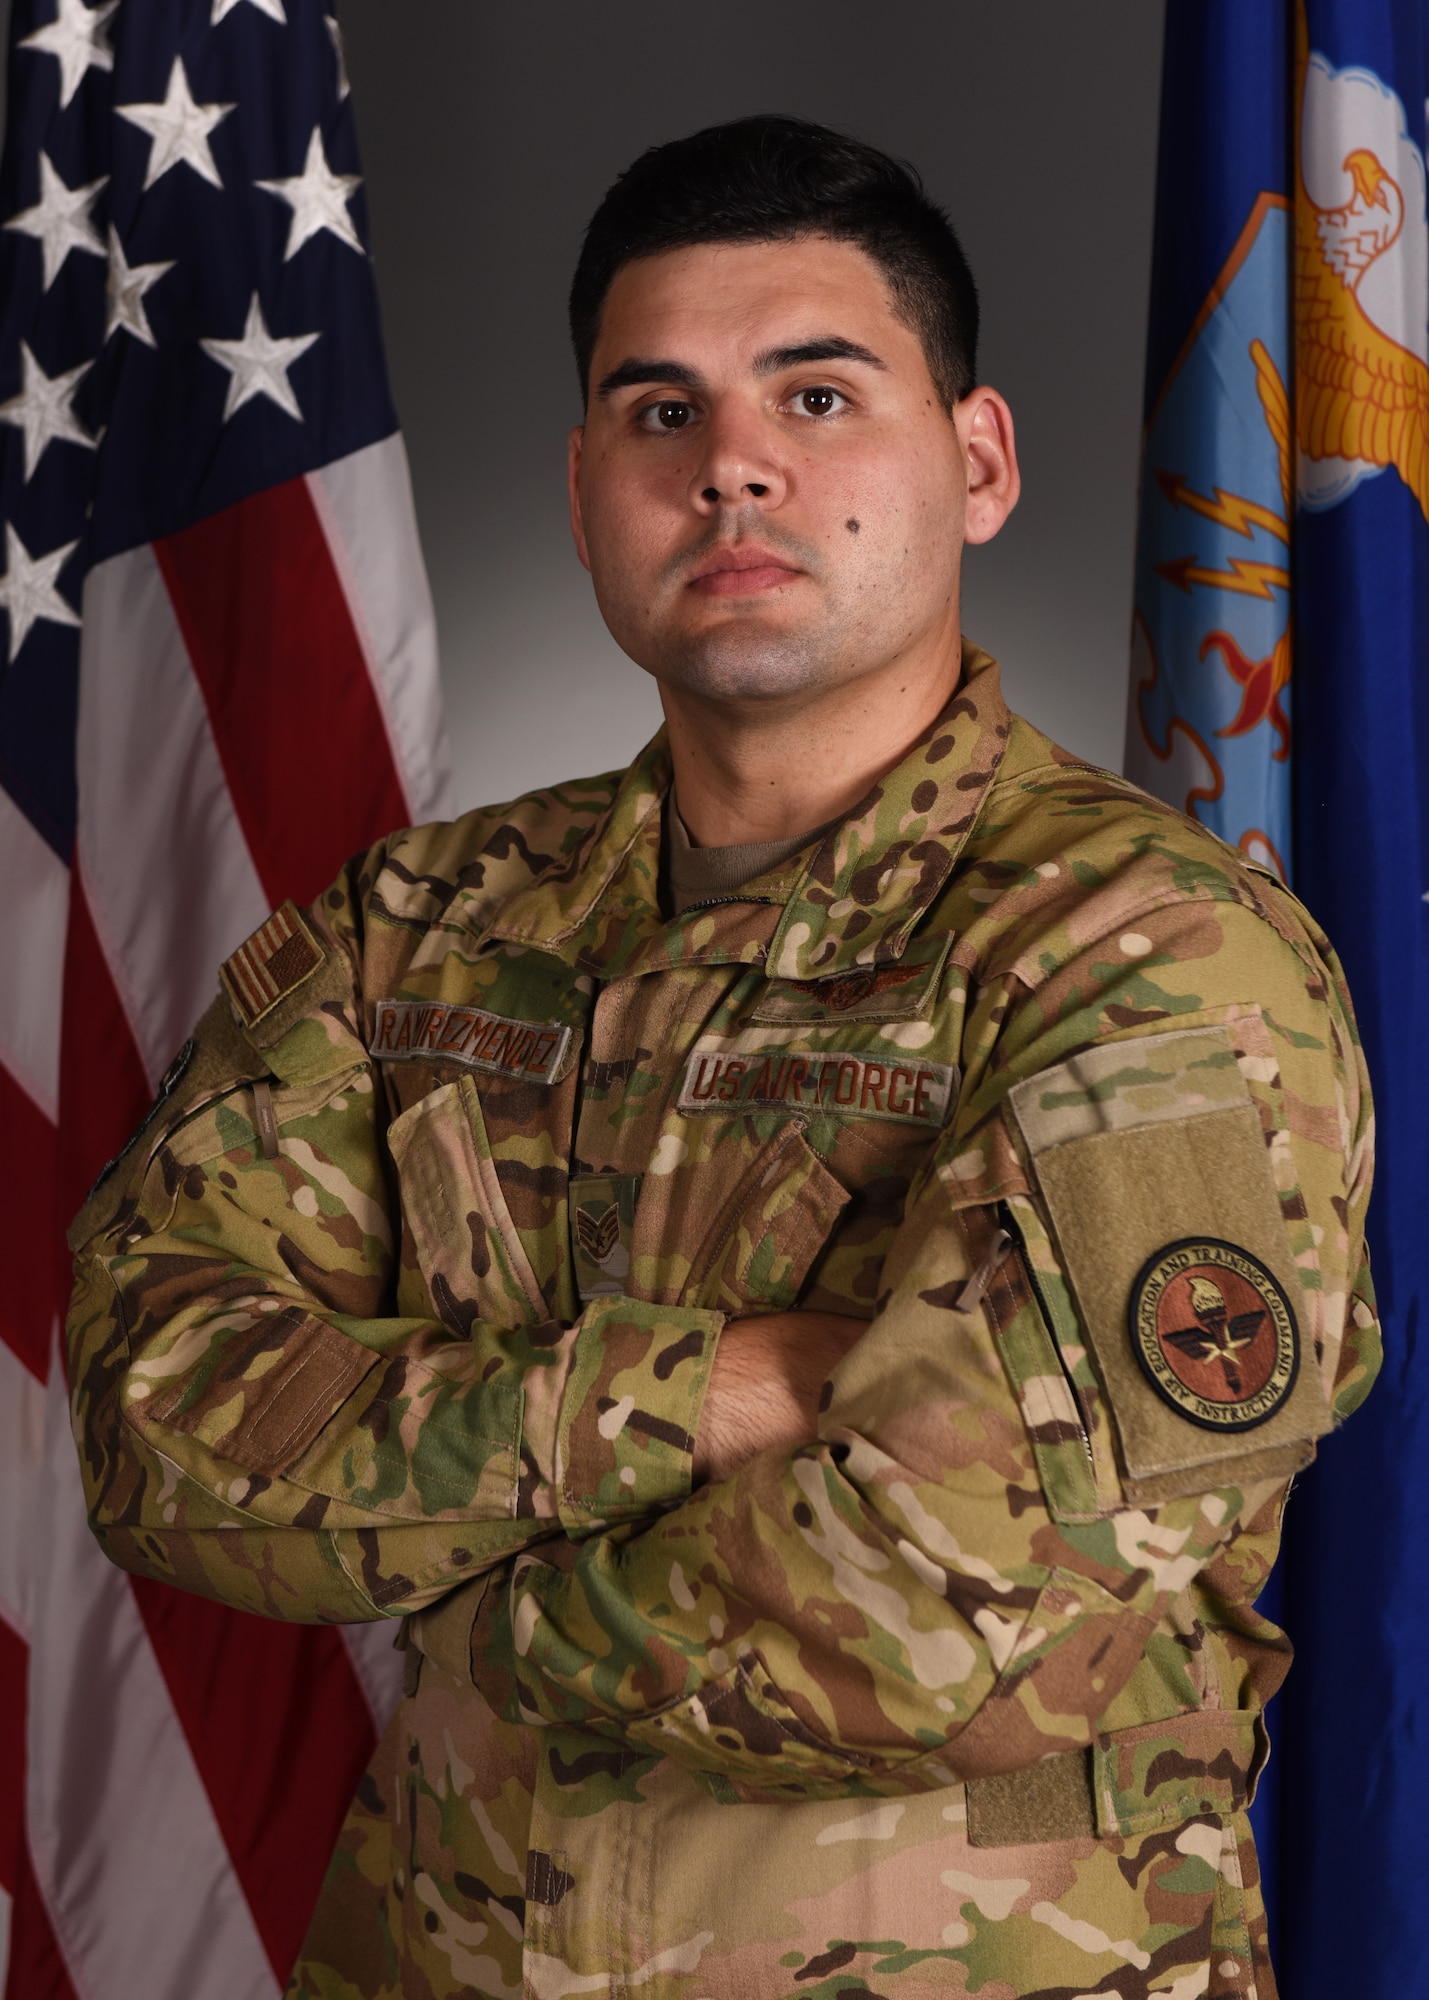 U.S. Air Force Staff Sgt. Ramon Ramirez-Mendez, 316th Training Squadron instructor, poses for a photo at Goodfellow Air Force Base, Texas, May 23, 2022. Ramirez-Mendez participated in the Doolittle Scholarship Program, a community partnership between Goodfellow and Angelo State University, which supports the professional development of instructors on base. (U.S. Air Force photo by Senior Airman Ethan Sherwood)